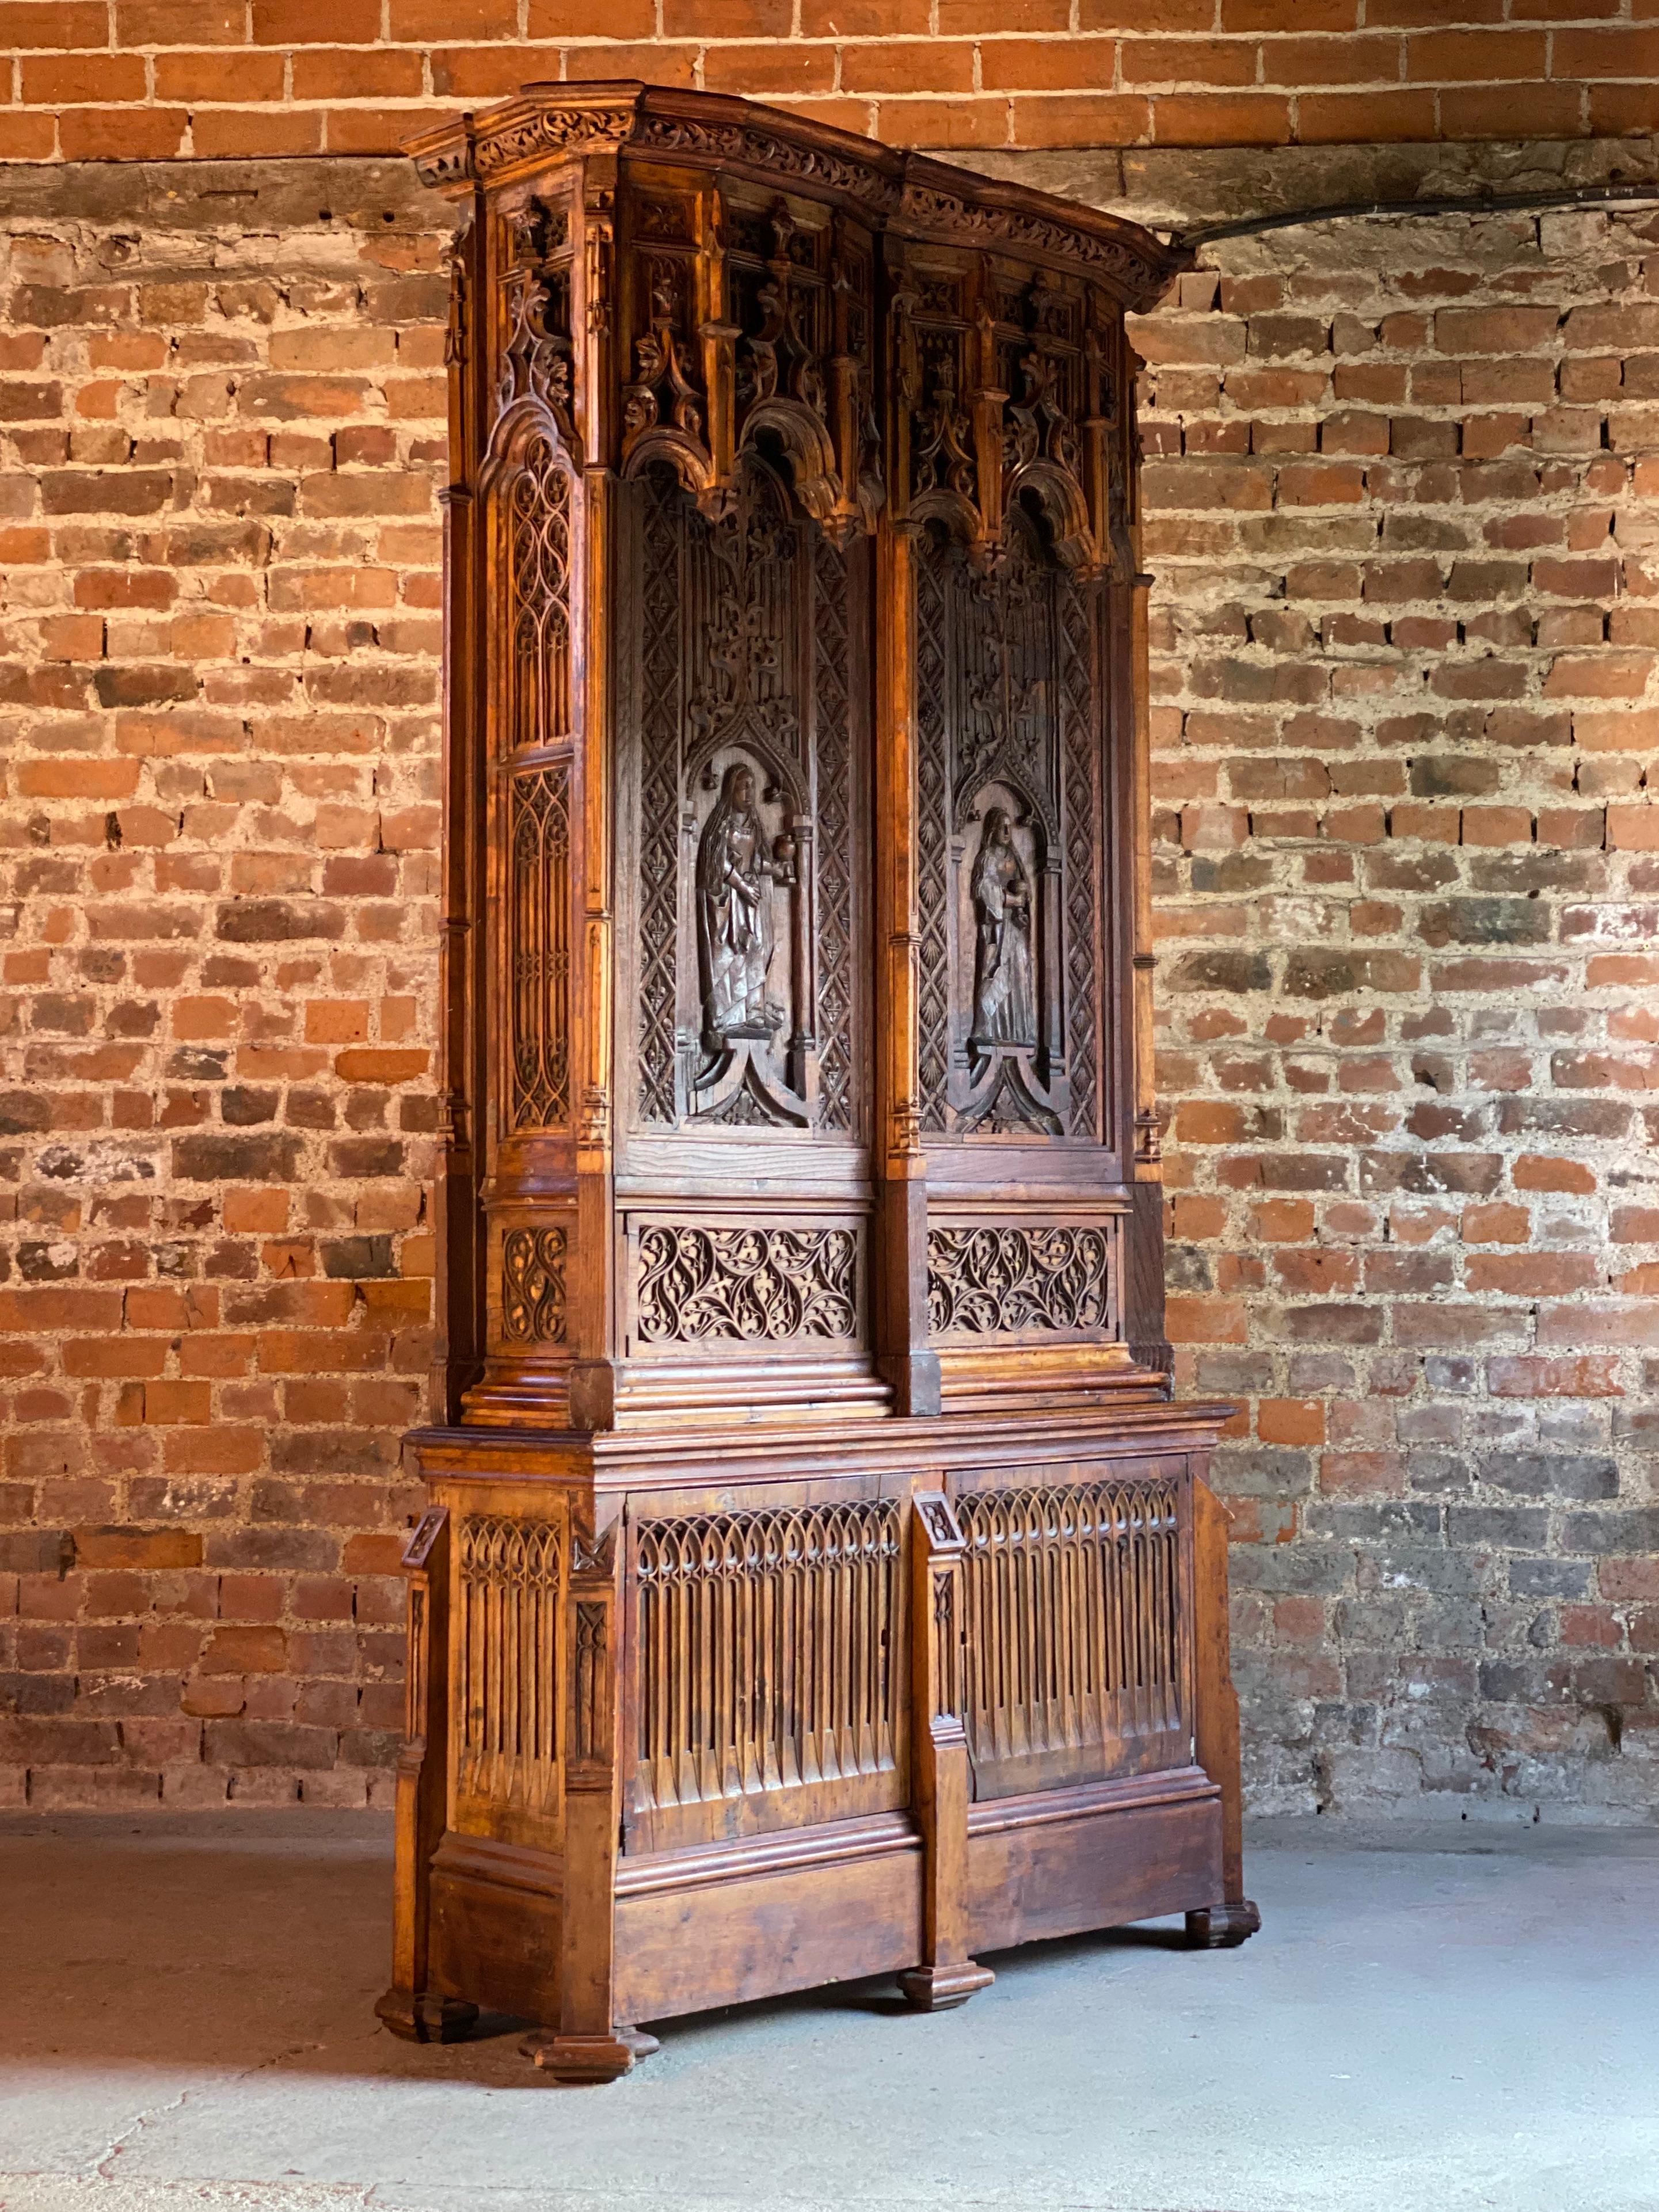 15th century French style Gothic Revival oak cupboard heavily carved, circa 1850

A magnificent, tall and imposing 15th century French style Napoleon III Gothic revival oak cupboard dating to circa1850, with extensive carved architectural decor